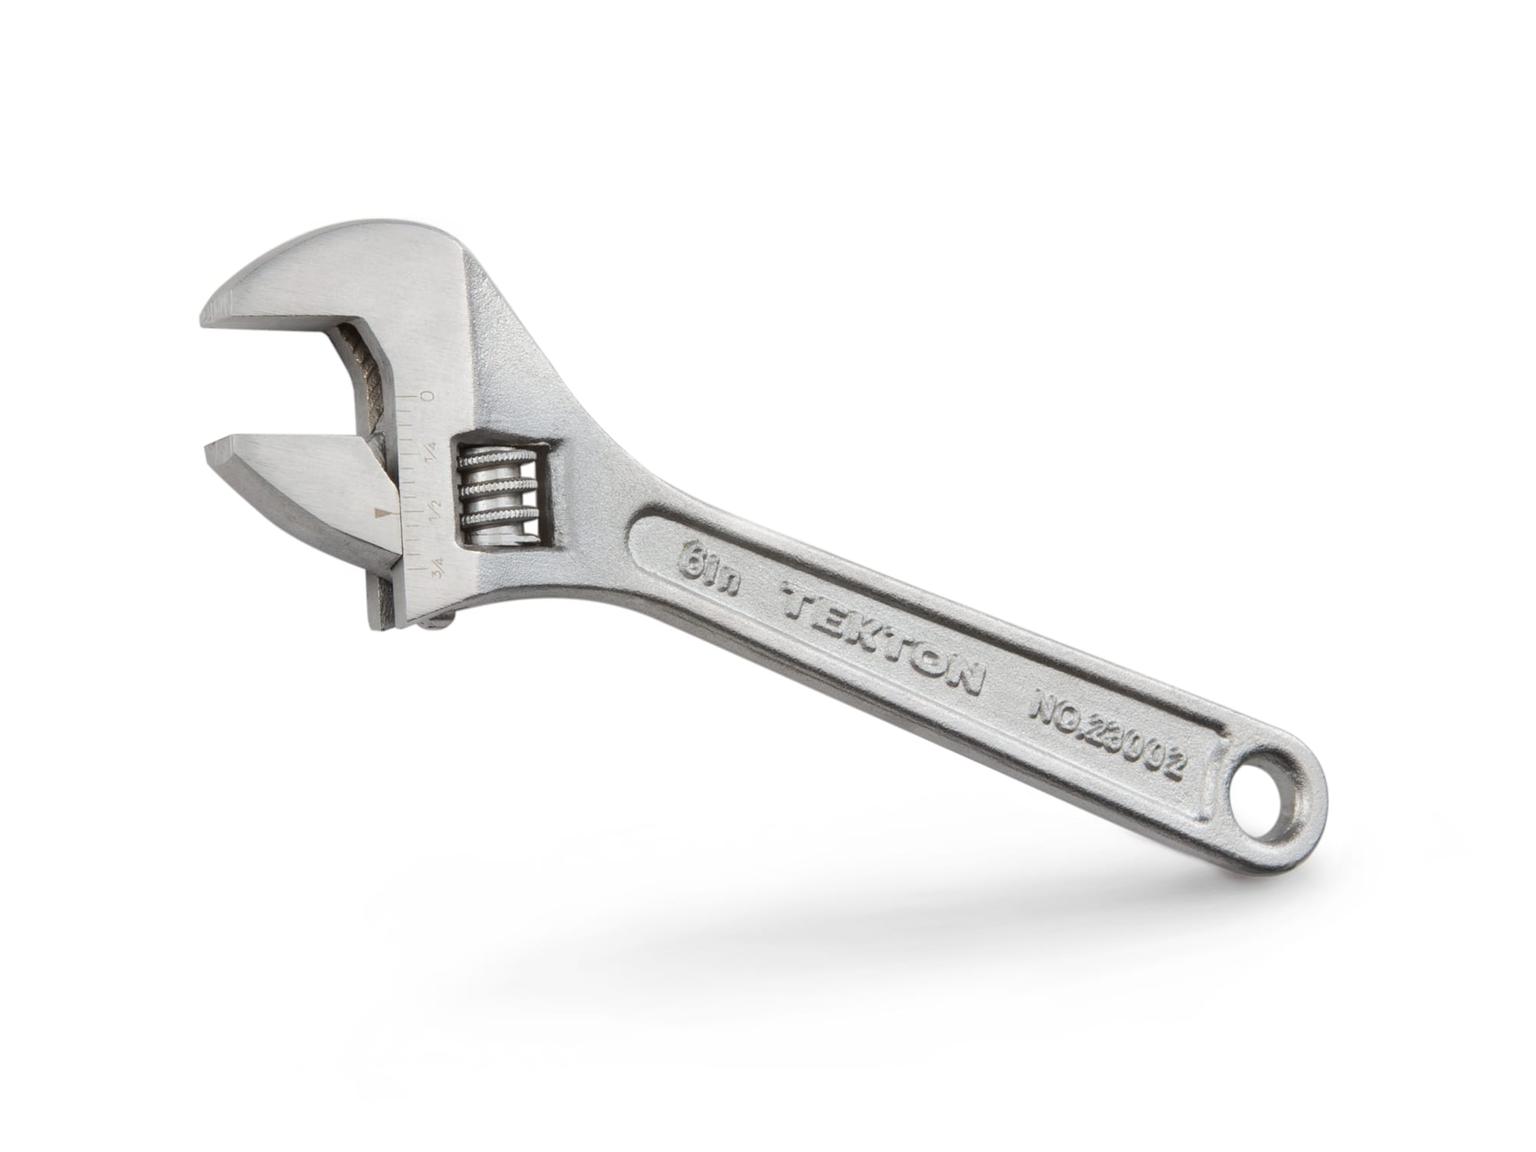 6 Inch Adjustable Wrench